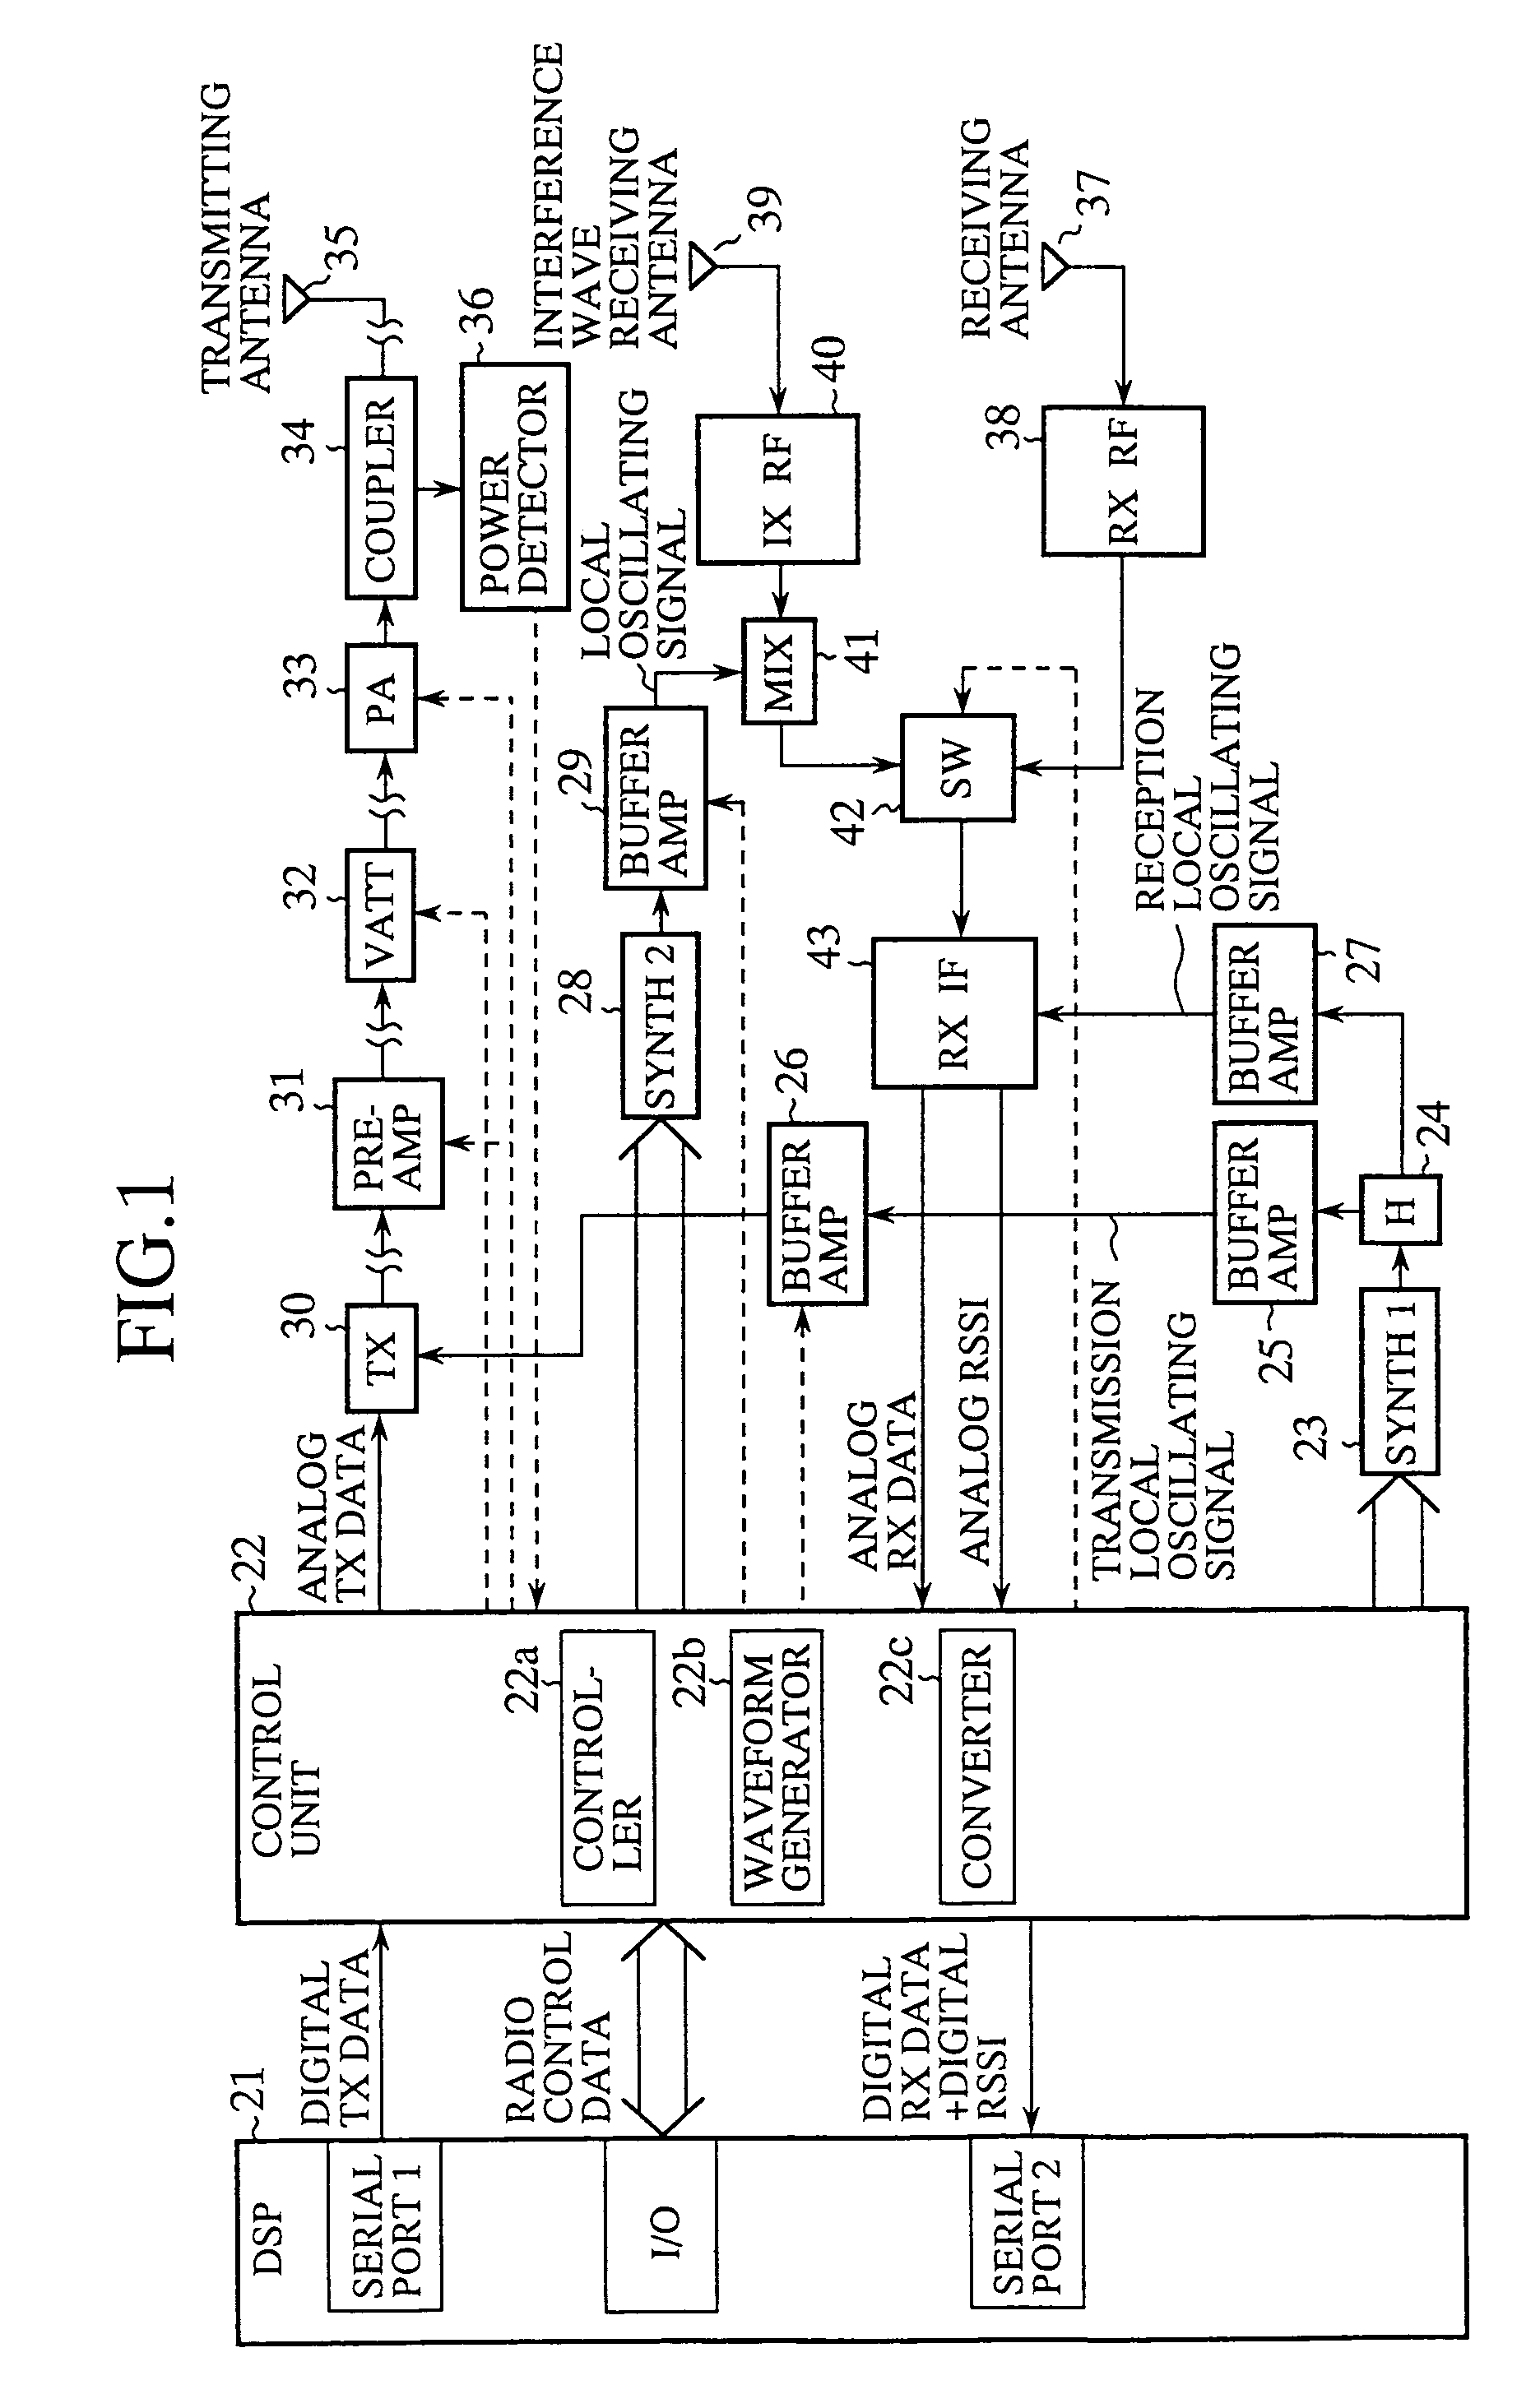 Device for and method of detecting interference waves